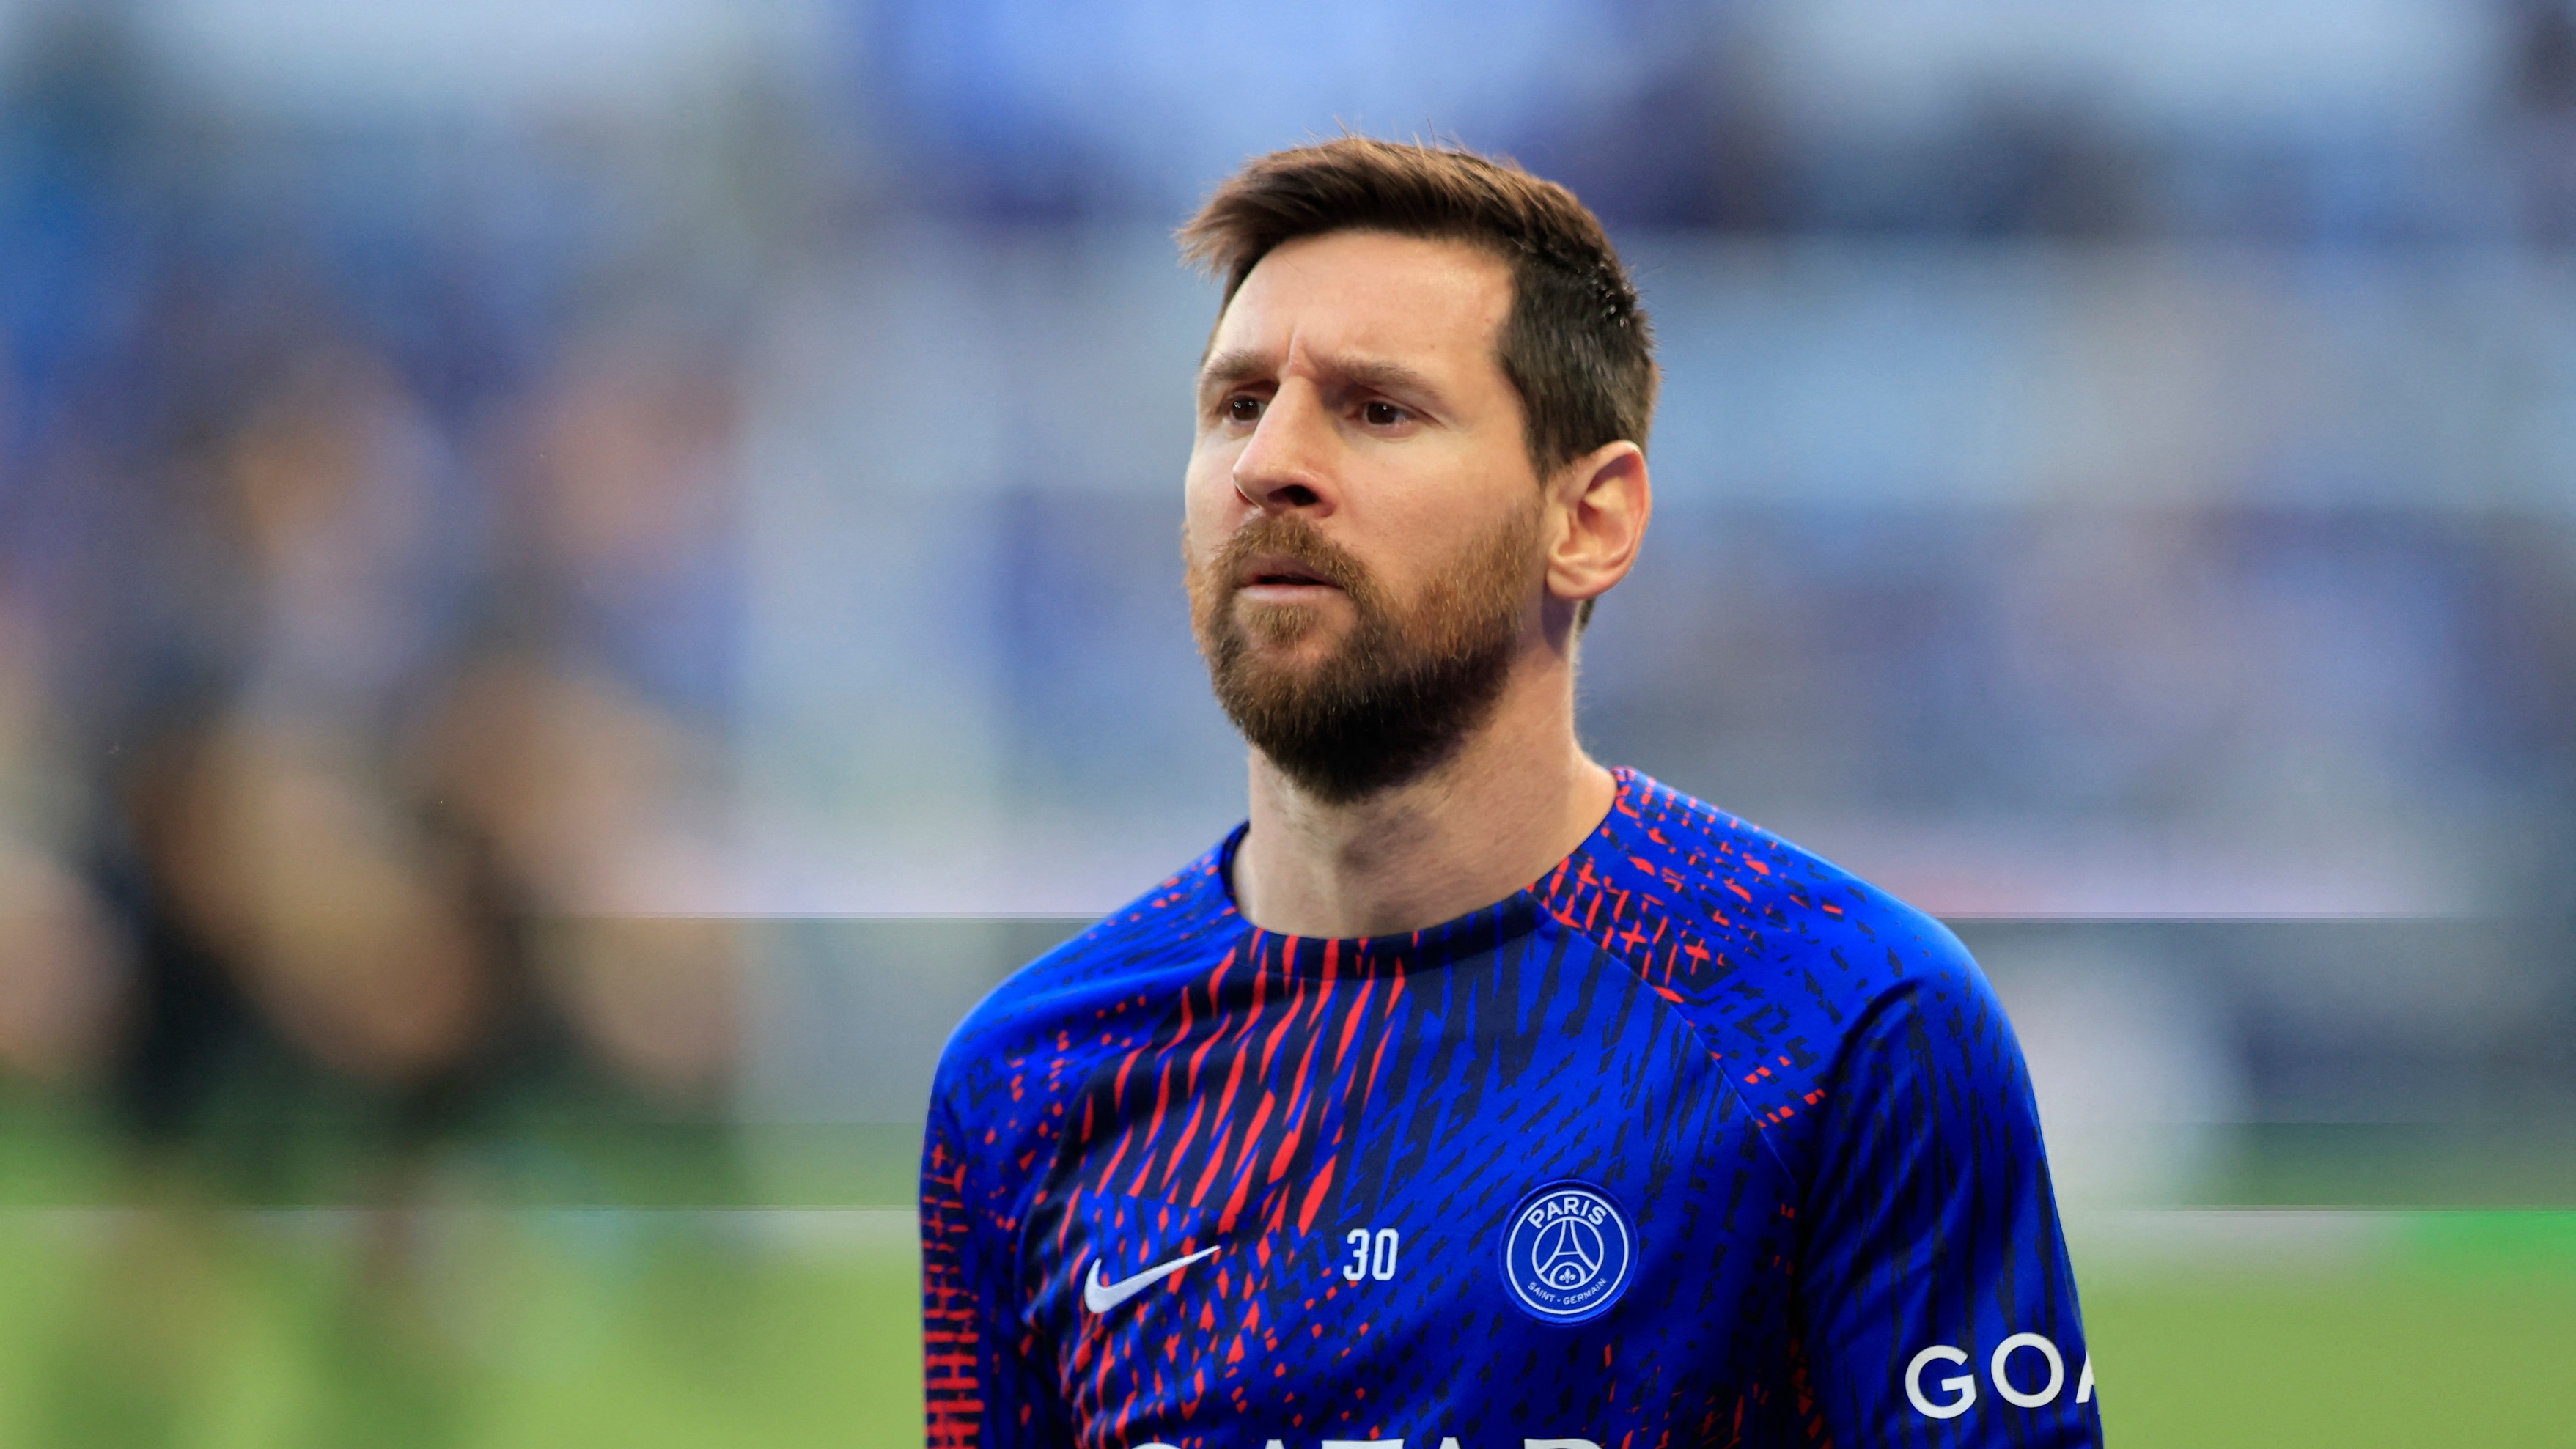 Soccer Football - Ligue 1 - RC Strasbourg v Paris St Germain - Stade de la Meinau, Strasbourg, France - May 27, 2023  Paris St Germain's Lionel Messi during the warm up before the match REUTERS/Pascal Rossignol